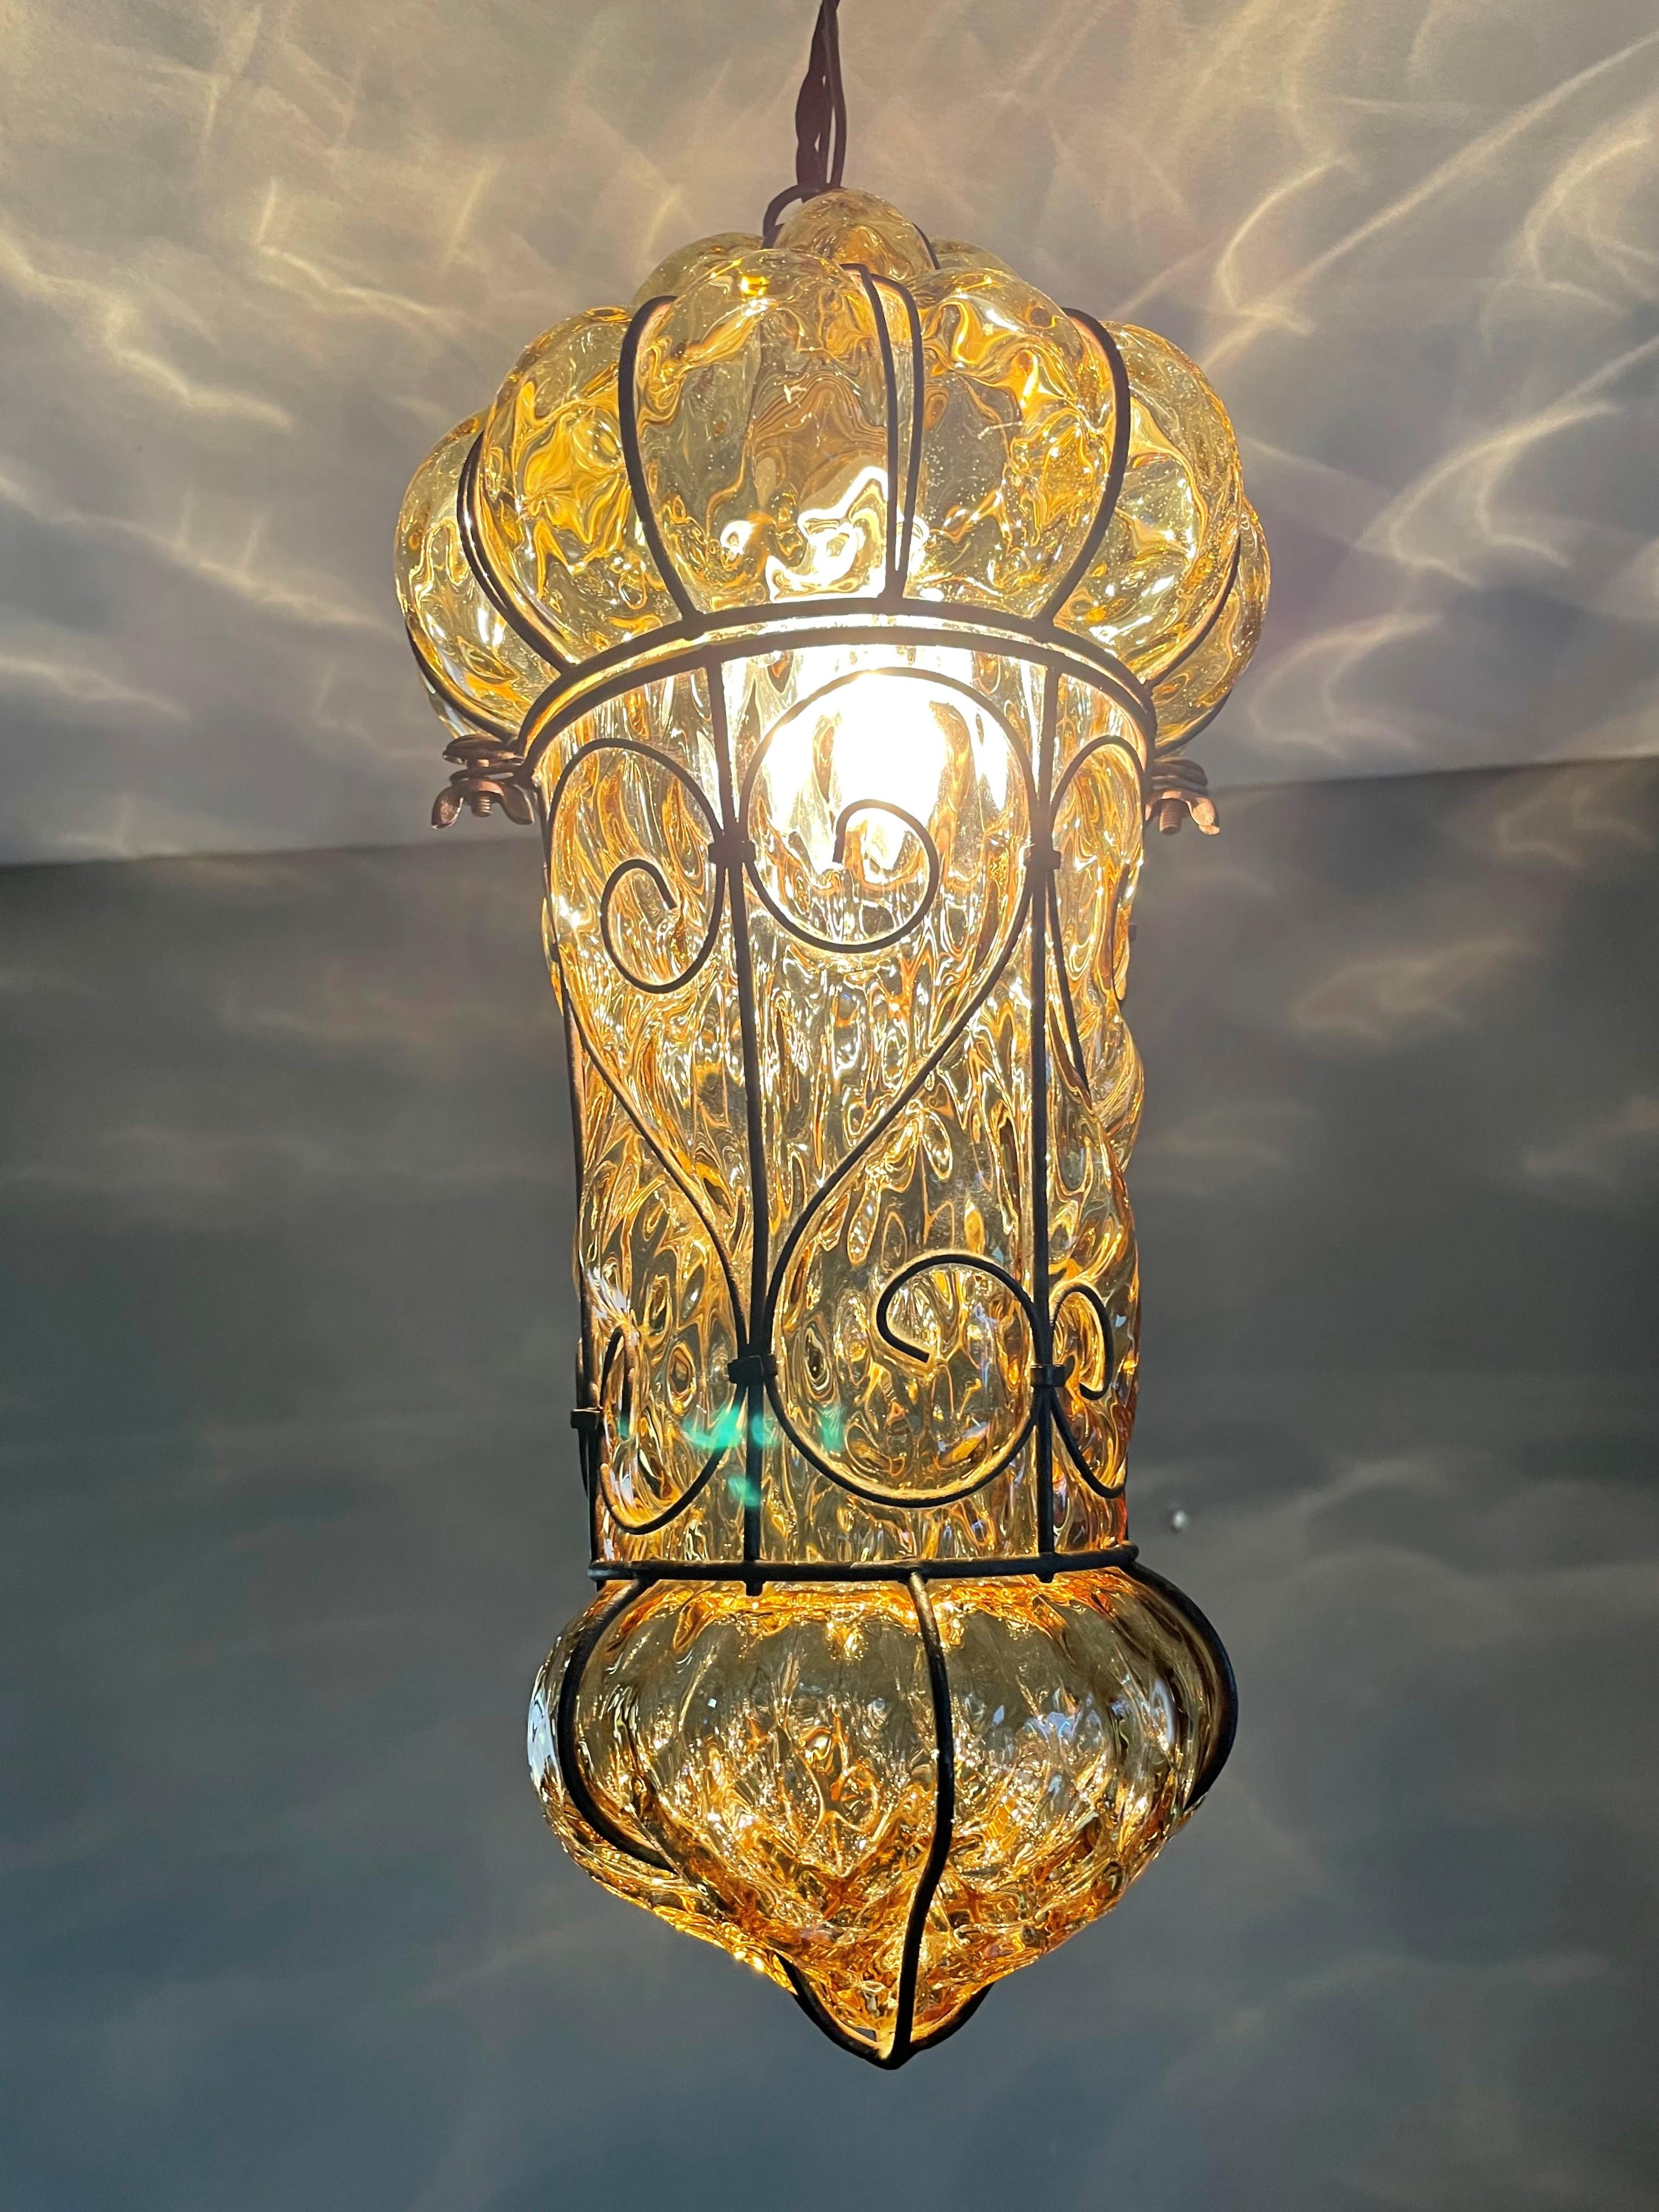 Beautiful color and practical size Italian fixture with mouth blown art glass in a metal frame. 

If you are looking for a rare and stylish shape fixture to grace your home then this handmade, near-antique specimen could be yours to enjoy soon. With